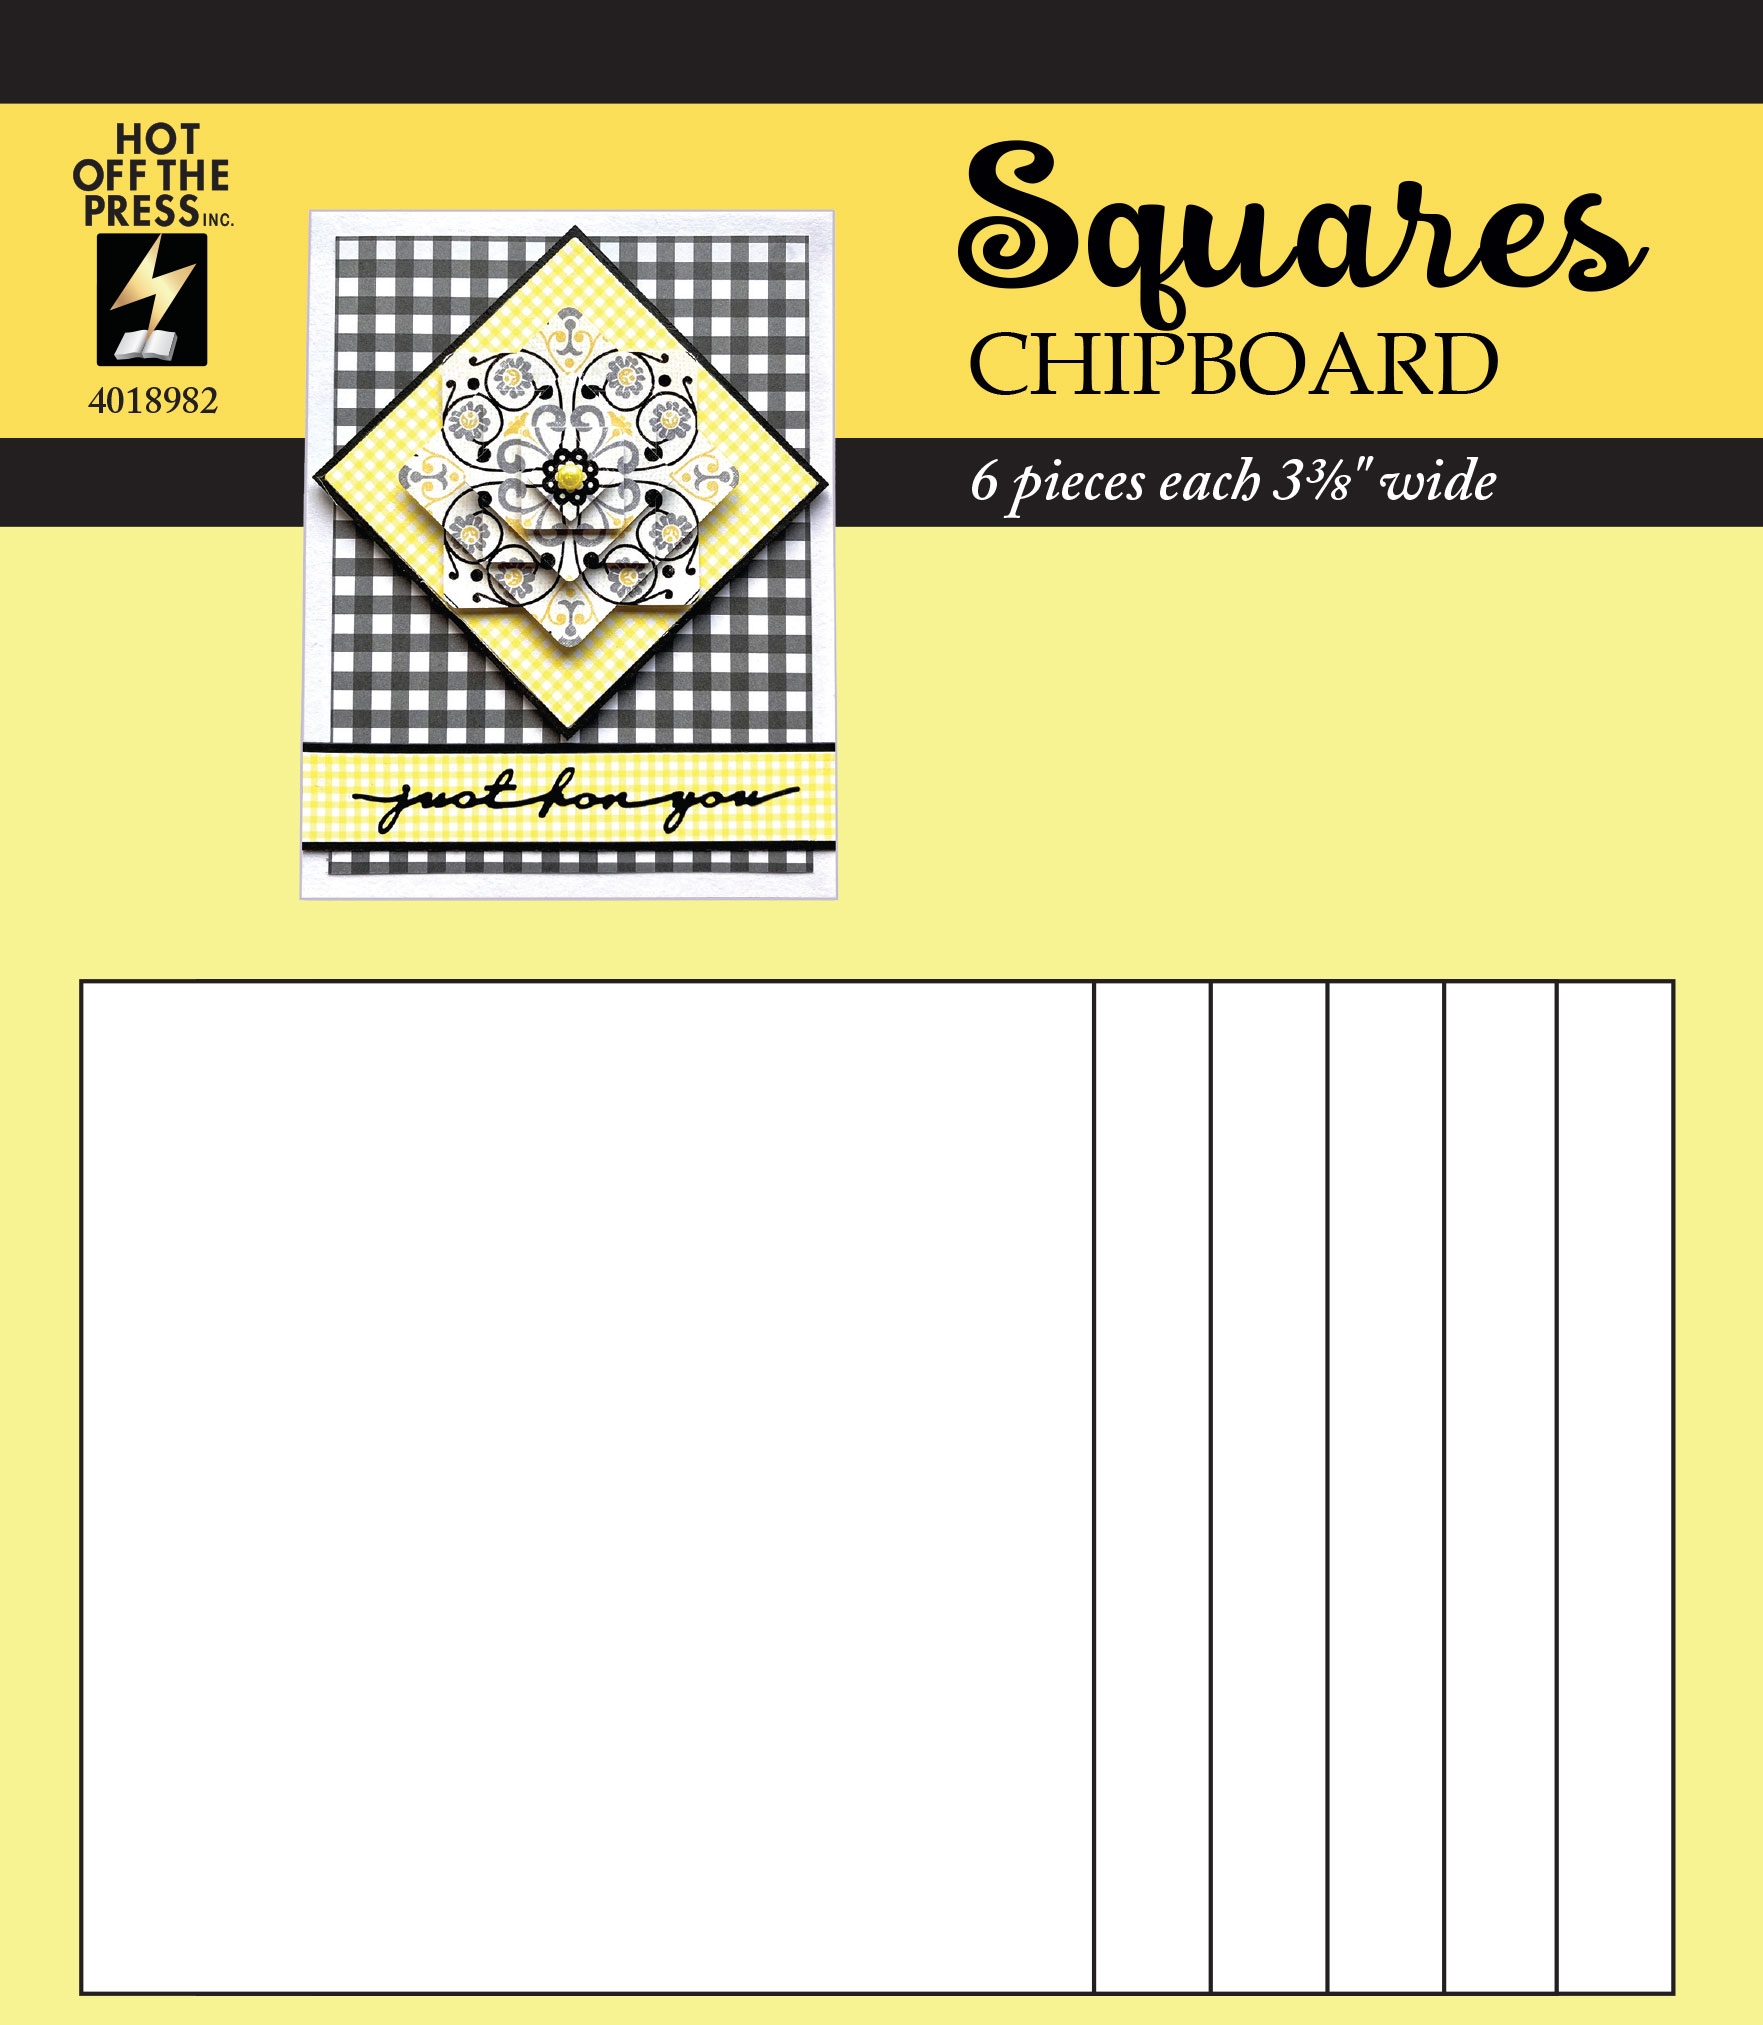 Square Chipboard, 6 pieces